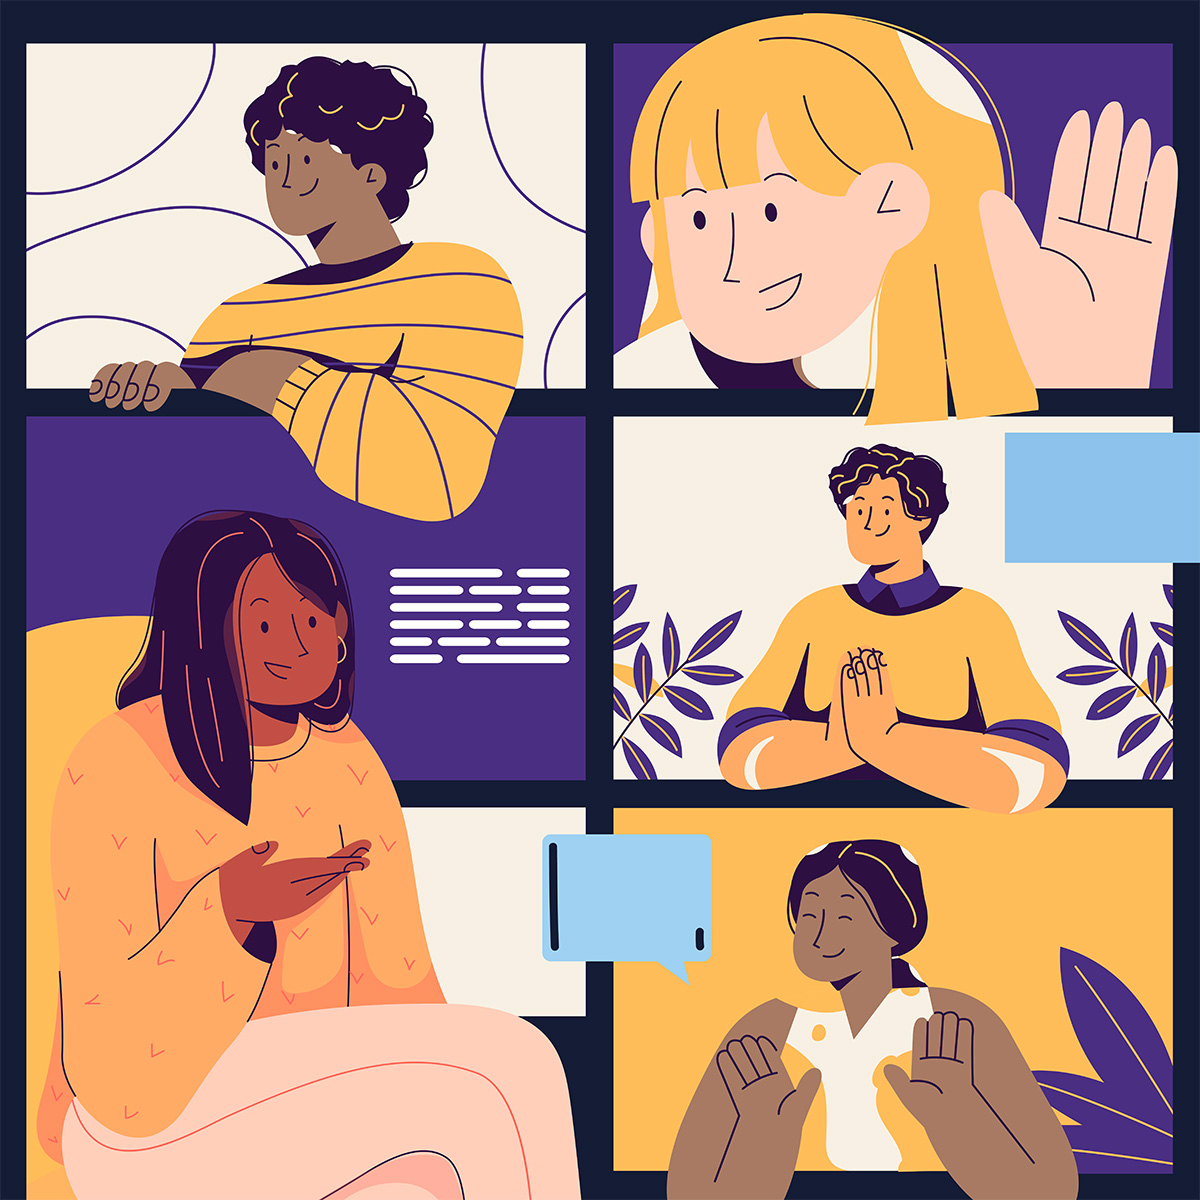 Colorful illustration of students having conversations in a remote learning environment